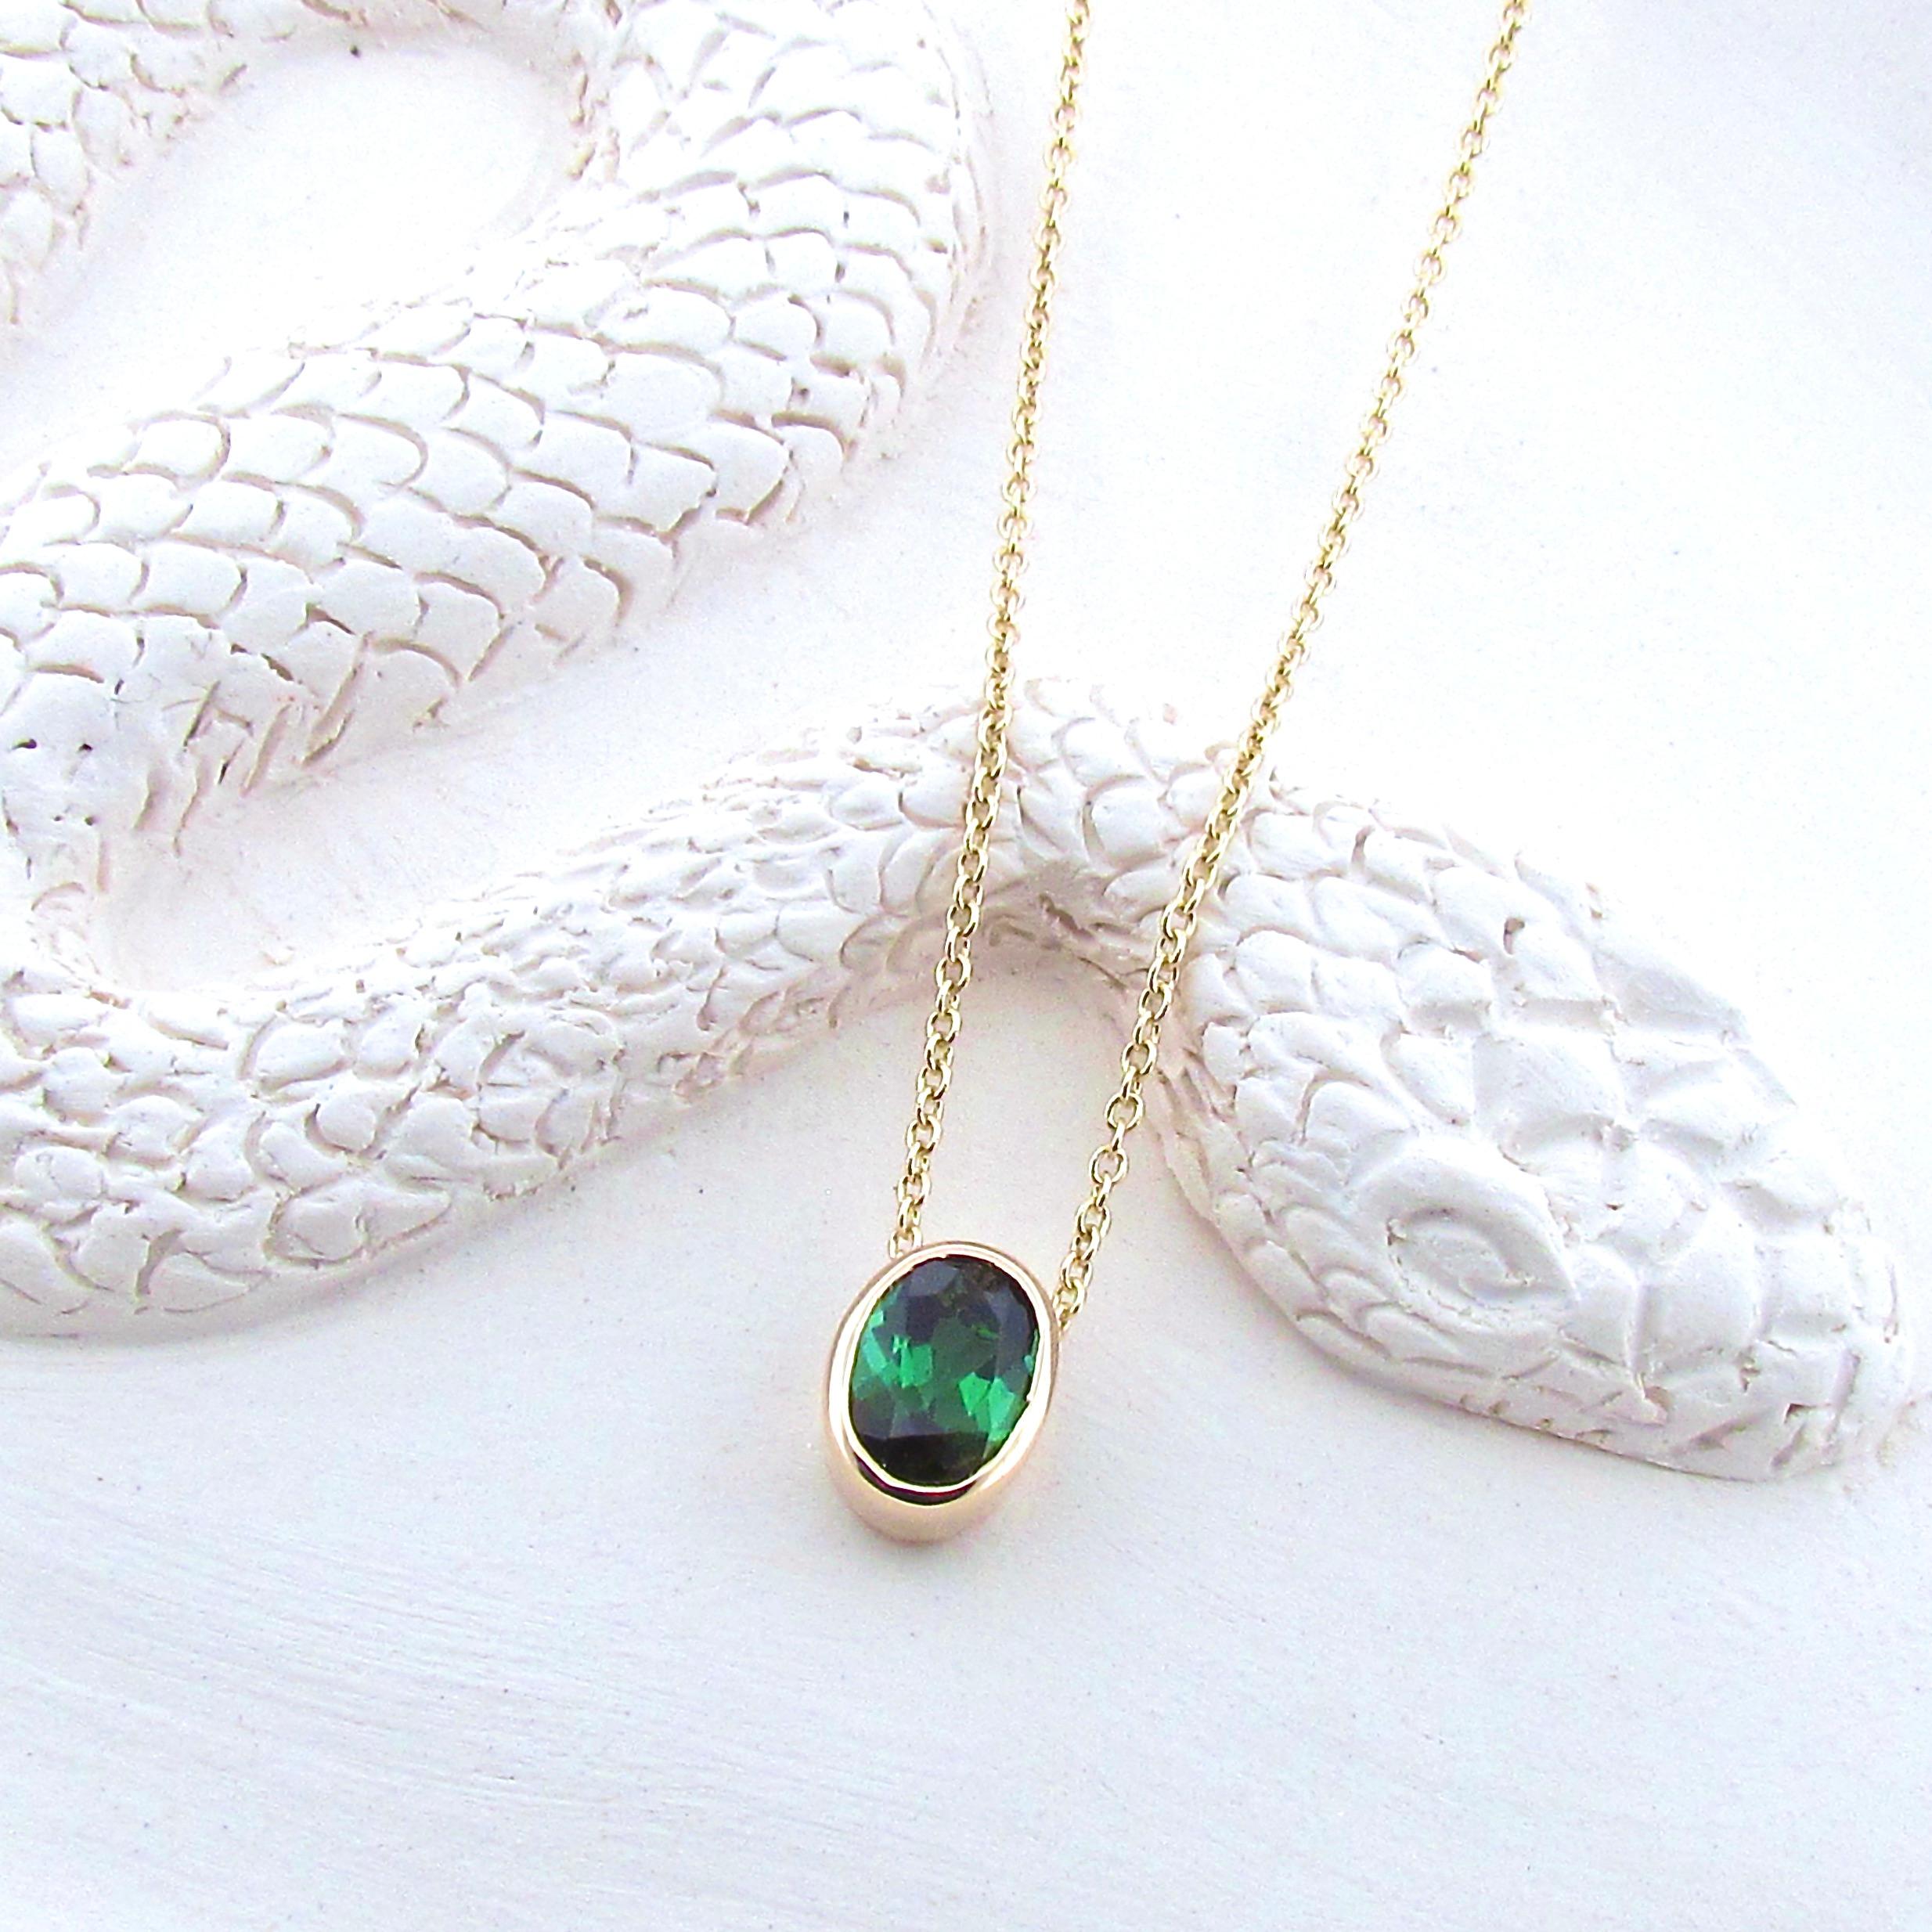 This 9ct solid gold small oval pendant is set with a beautifully faceted bright natural 1ct Green Tourmaline, and comes on a 40cm/16inch 9ct yellow gold cable chain, it is superior in quality and has a nice weight to it. The deep Green hue of